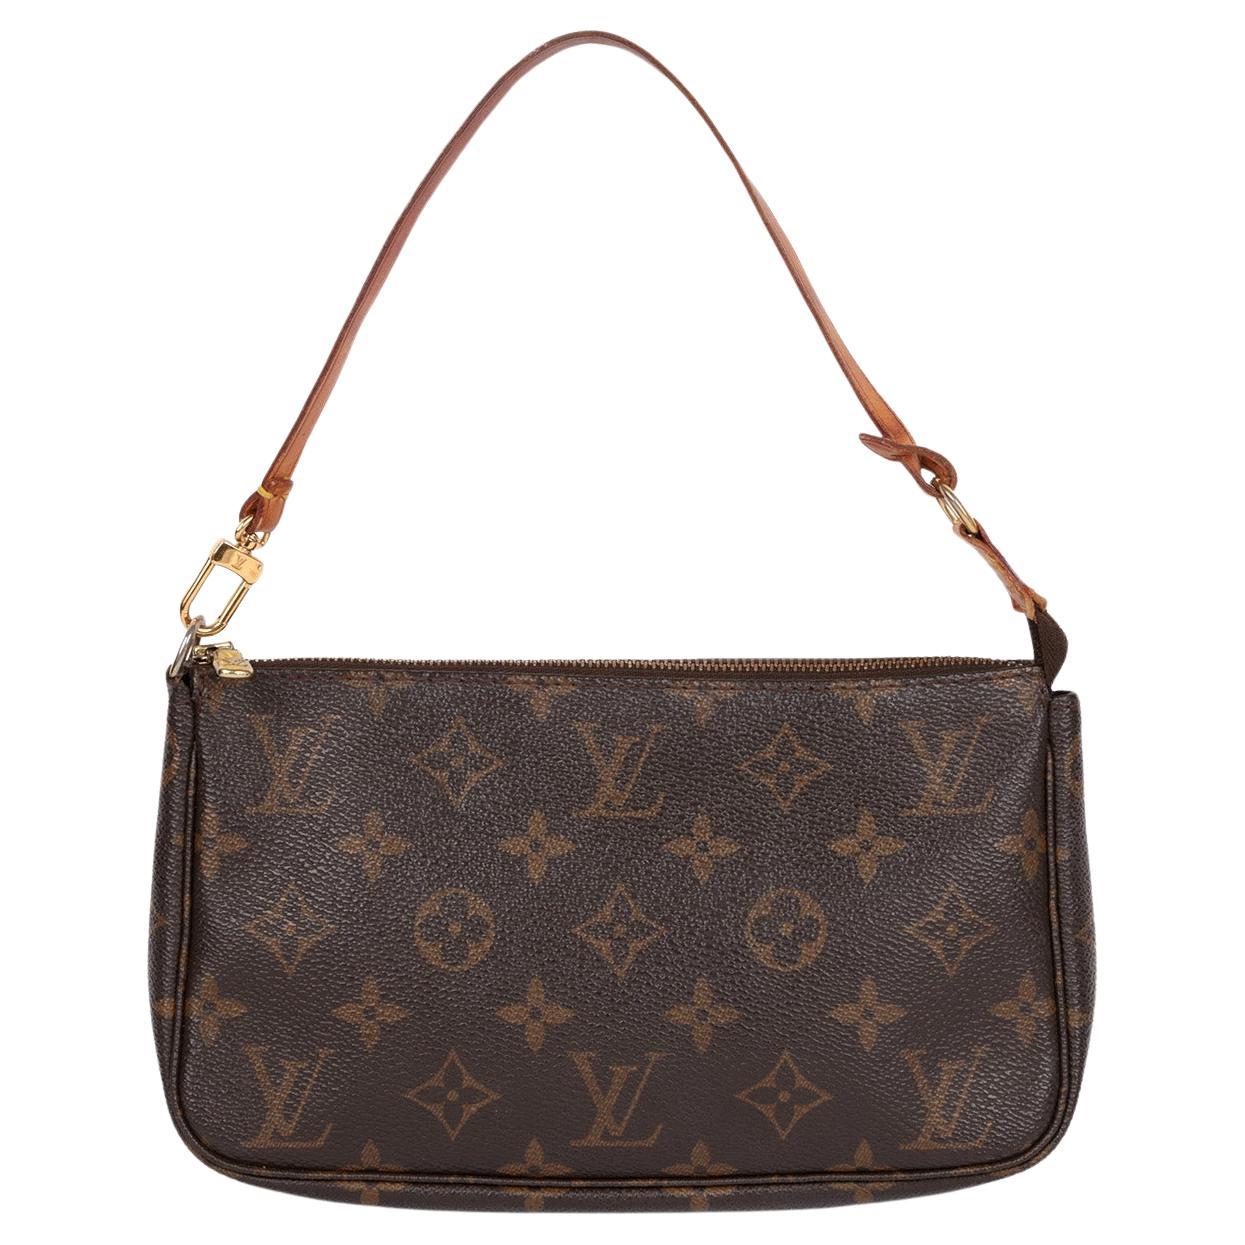 Does Louis Vuitton have sales on Black Friday?